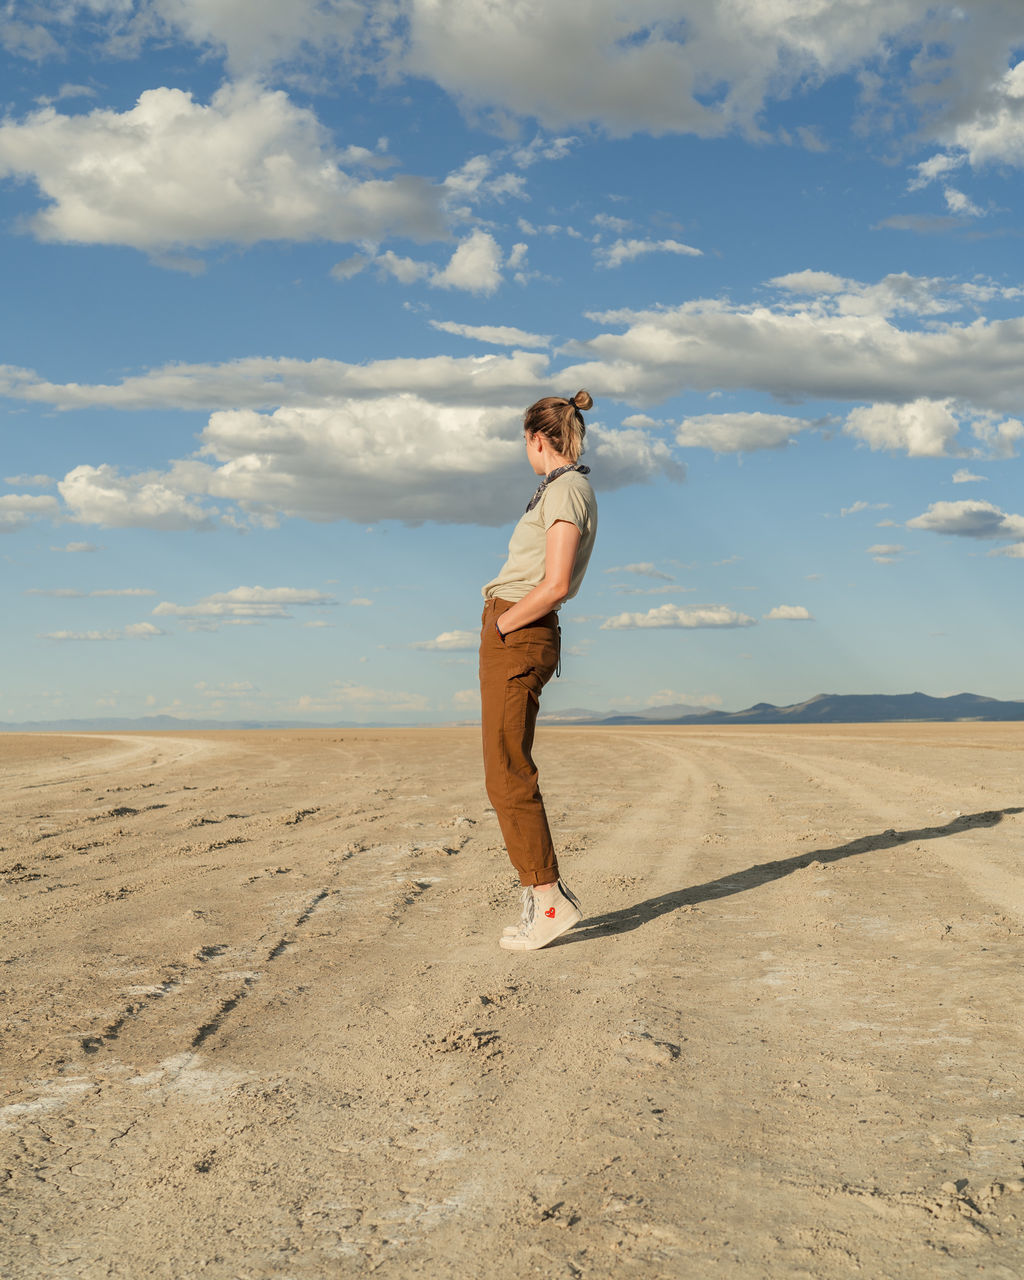 sky, cloud - sky, land, one person, full length, desert, leisure activity, real people, scenics - nature, lifestyles, environment, sand, nature, day, landscape, beauty in nature, tranquil scene, non-urban scene, young adult, tranquility, climate, arid climate, outdoors